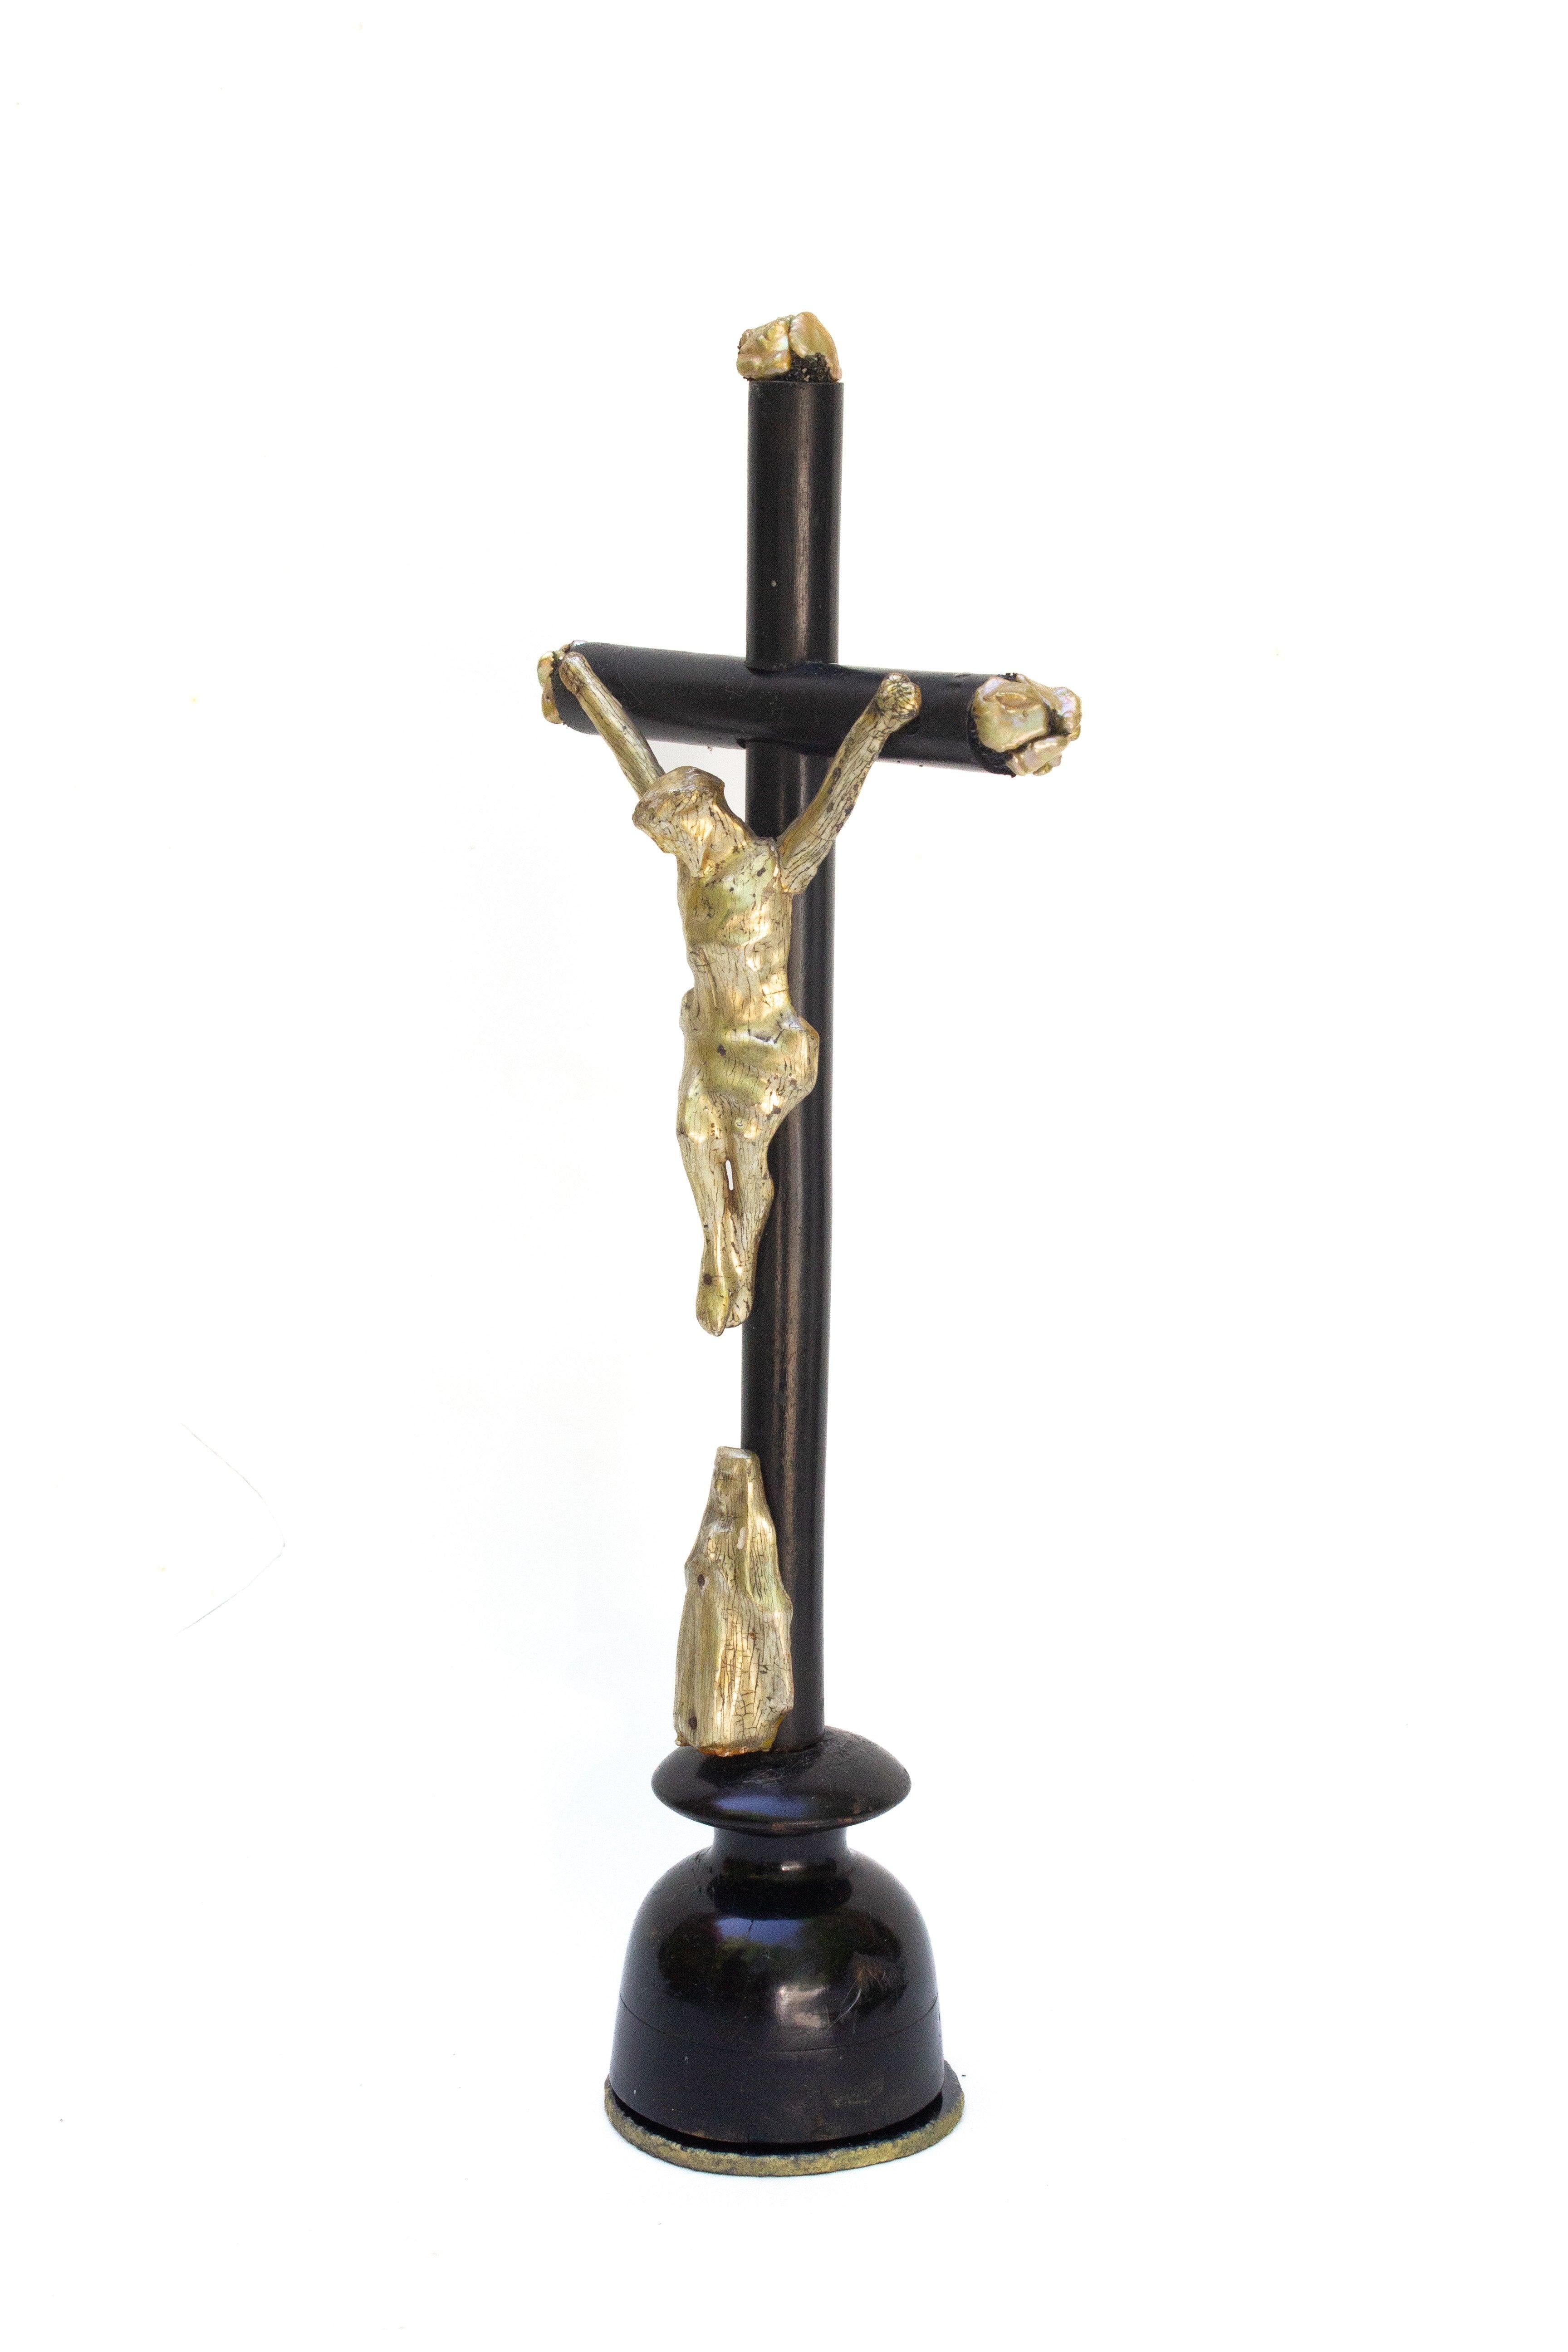 Porcelain 19th Century Italian Black Crucifix with a Pearlescent Gold Figure of Christ